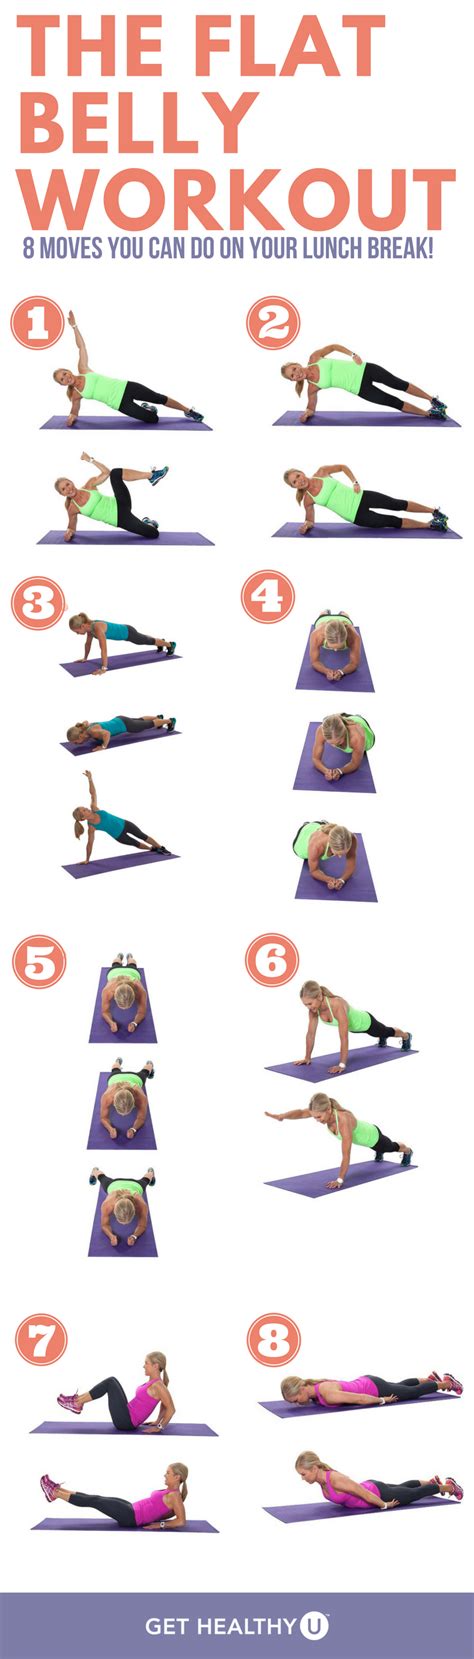 Check Out This 8 Move Super Simple Flat Belly Workout Work Those Abs